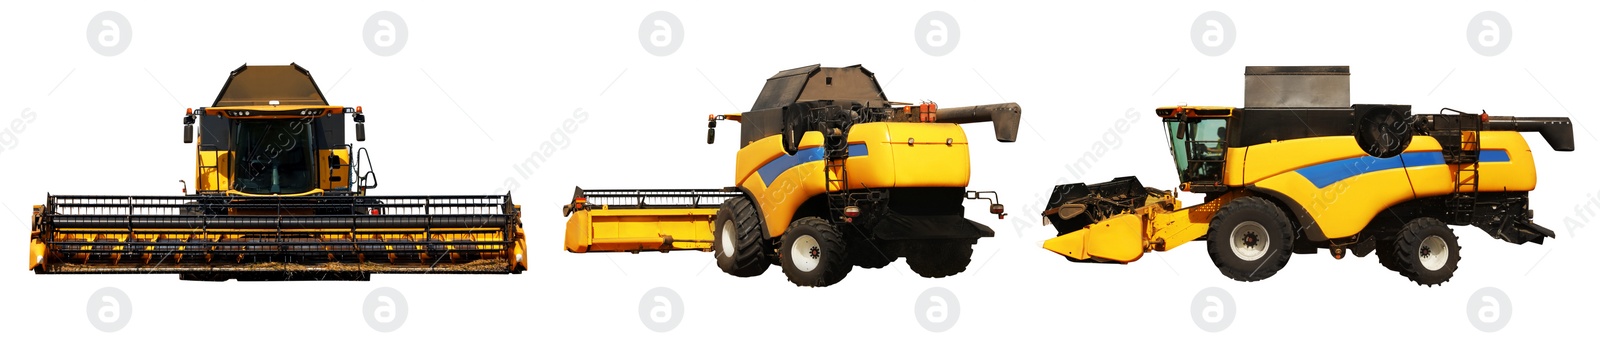 Image of Modern combine harvester on white background, views from different sides. Agricultural machinery